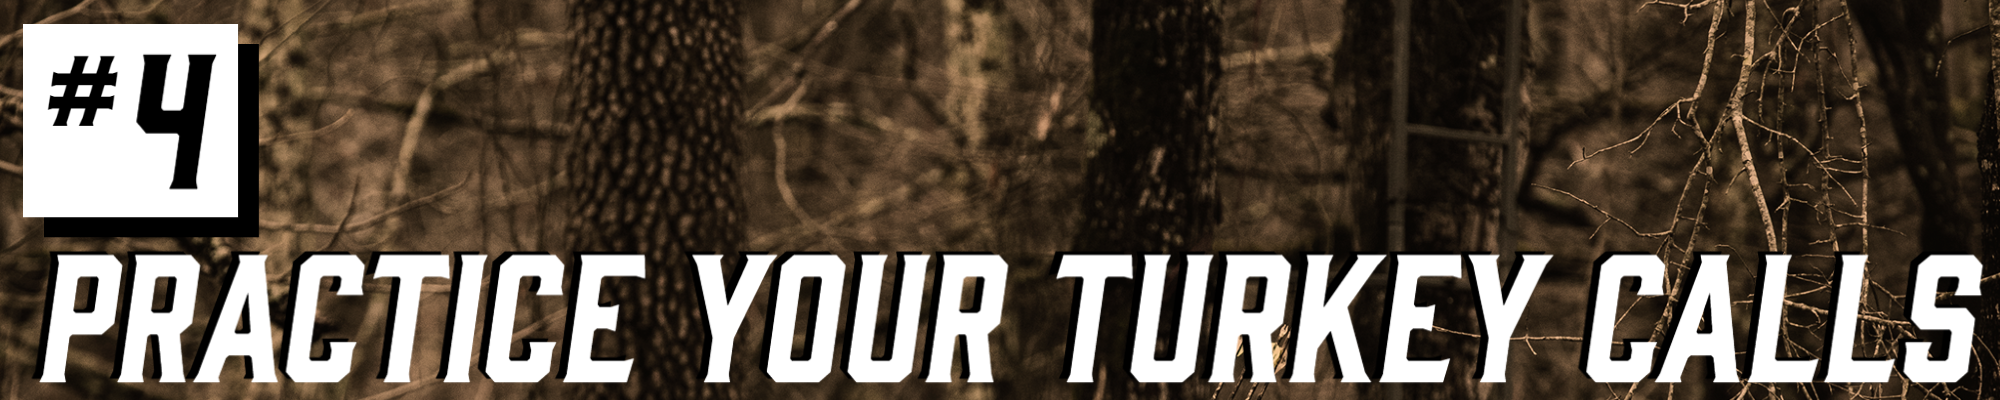 Text on image saying, "Number 4, practice your turkey calls." Image of a hunter walking away into the woods. 